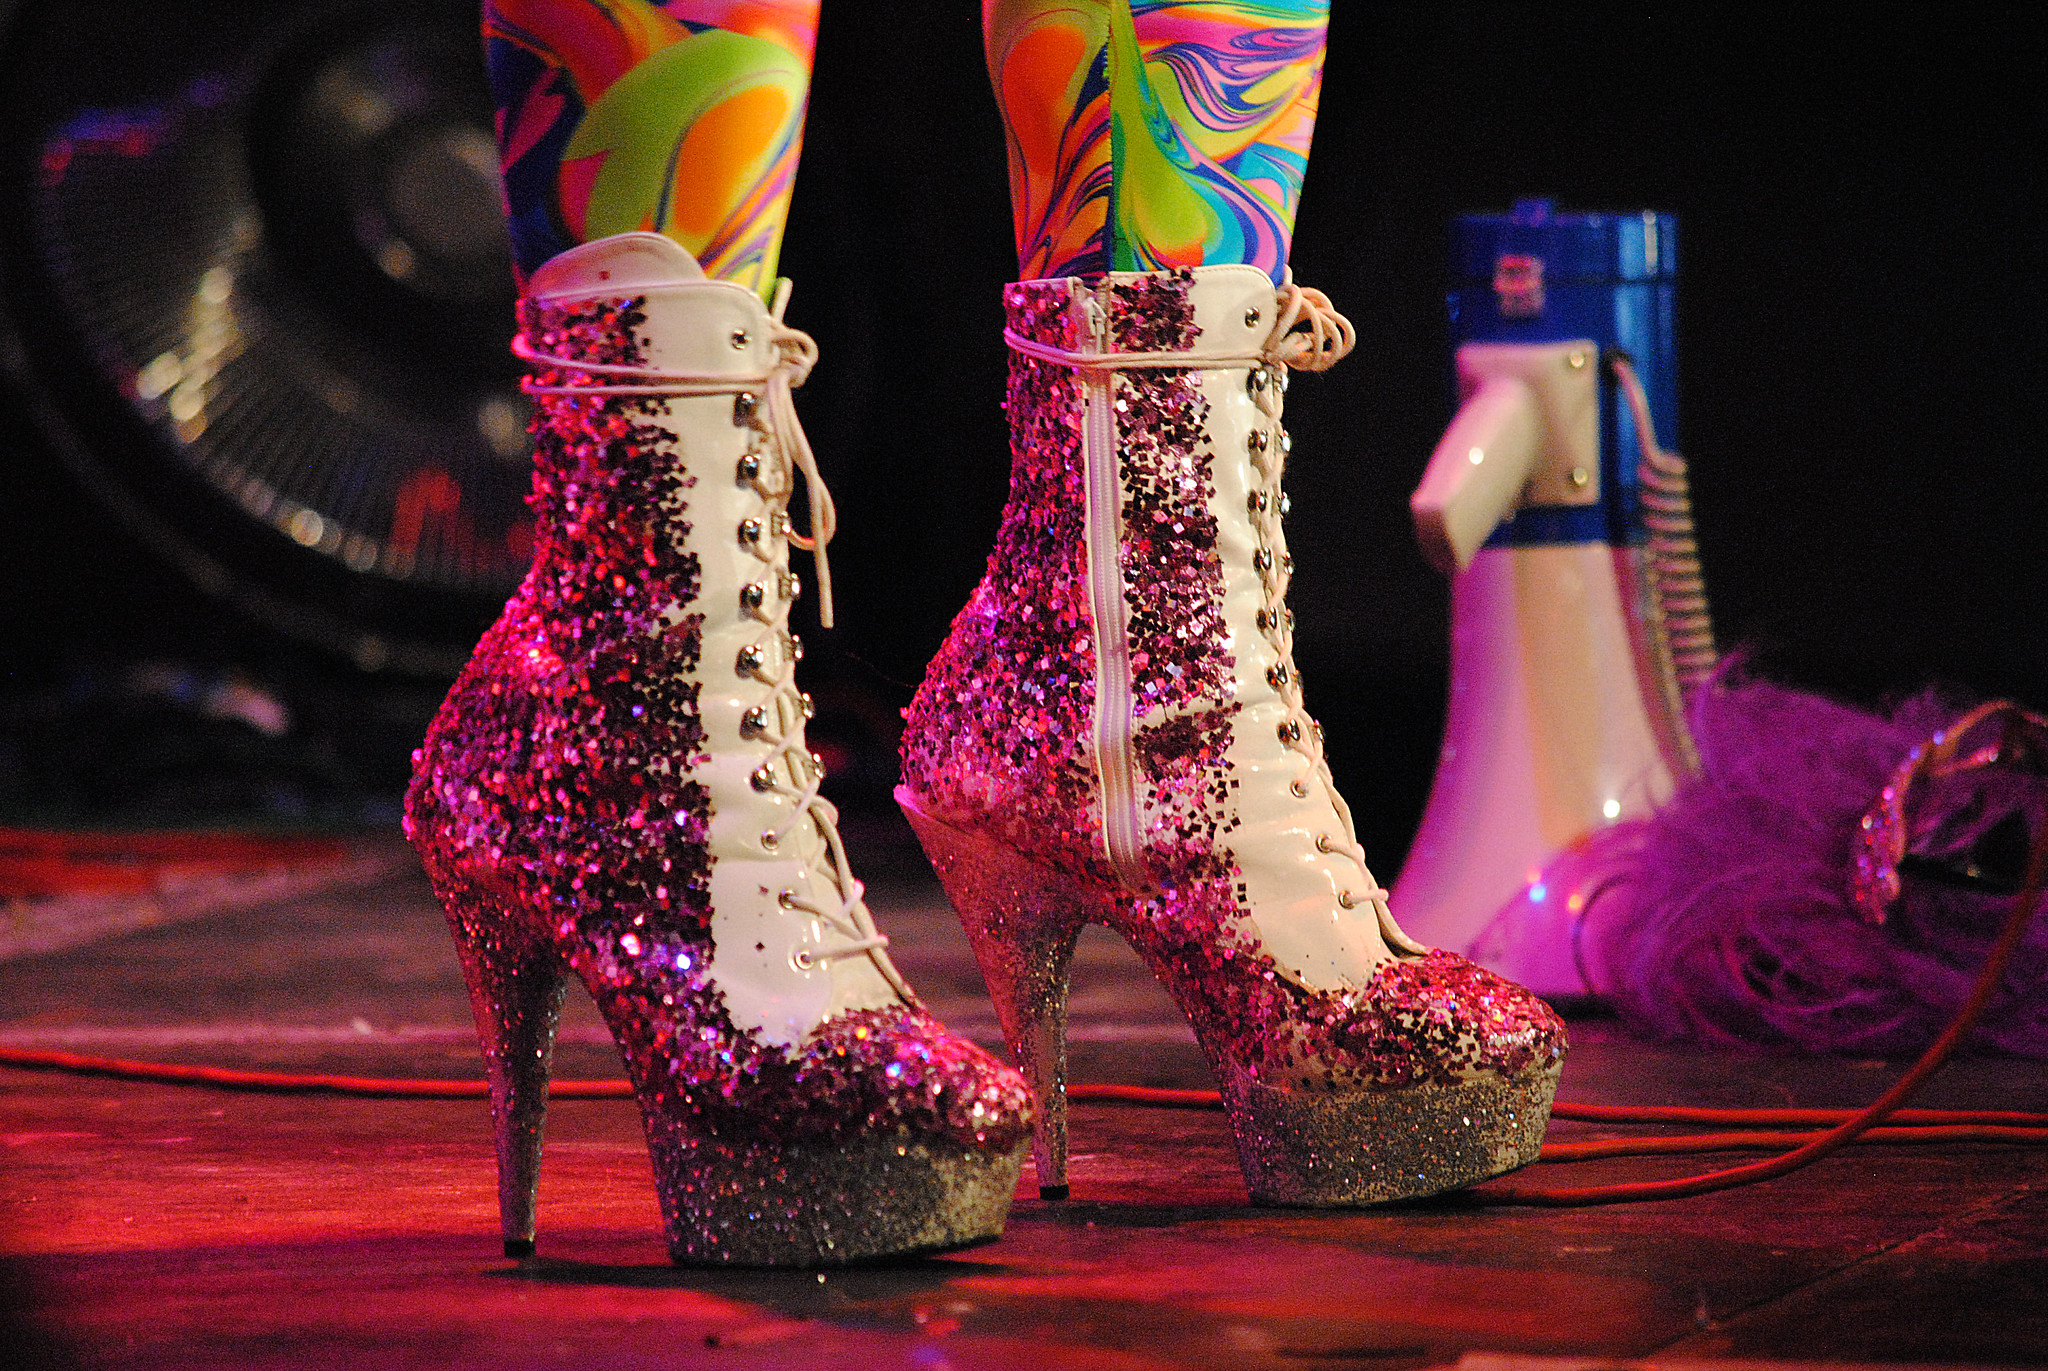 Person wear spiky stiletto platform shoes with glitter with a megaphone in the background